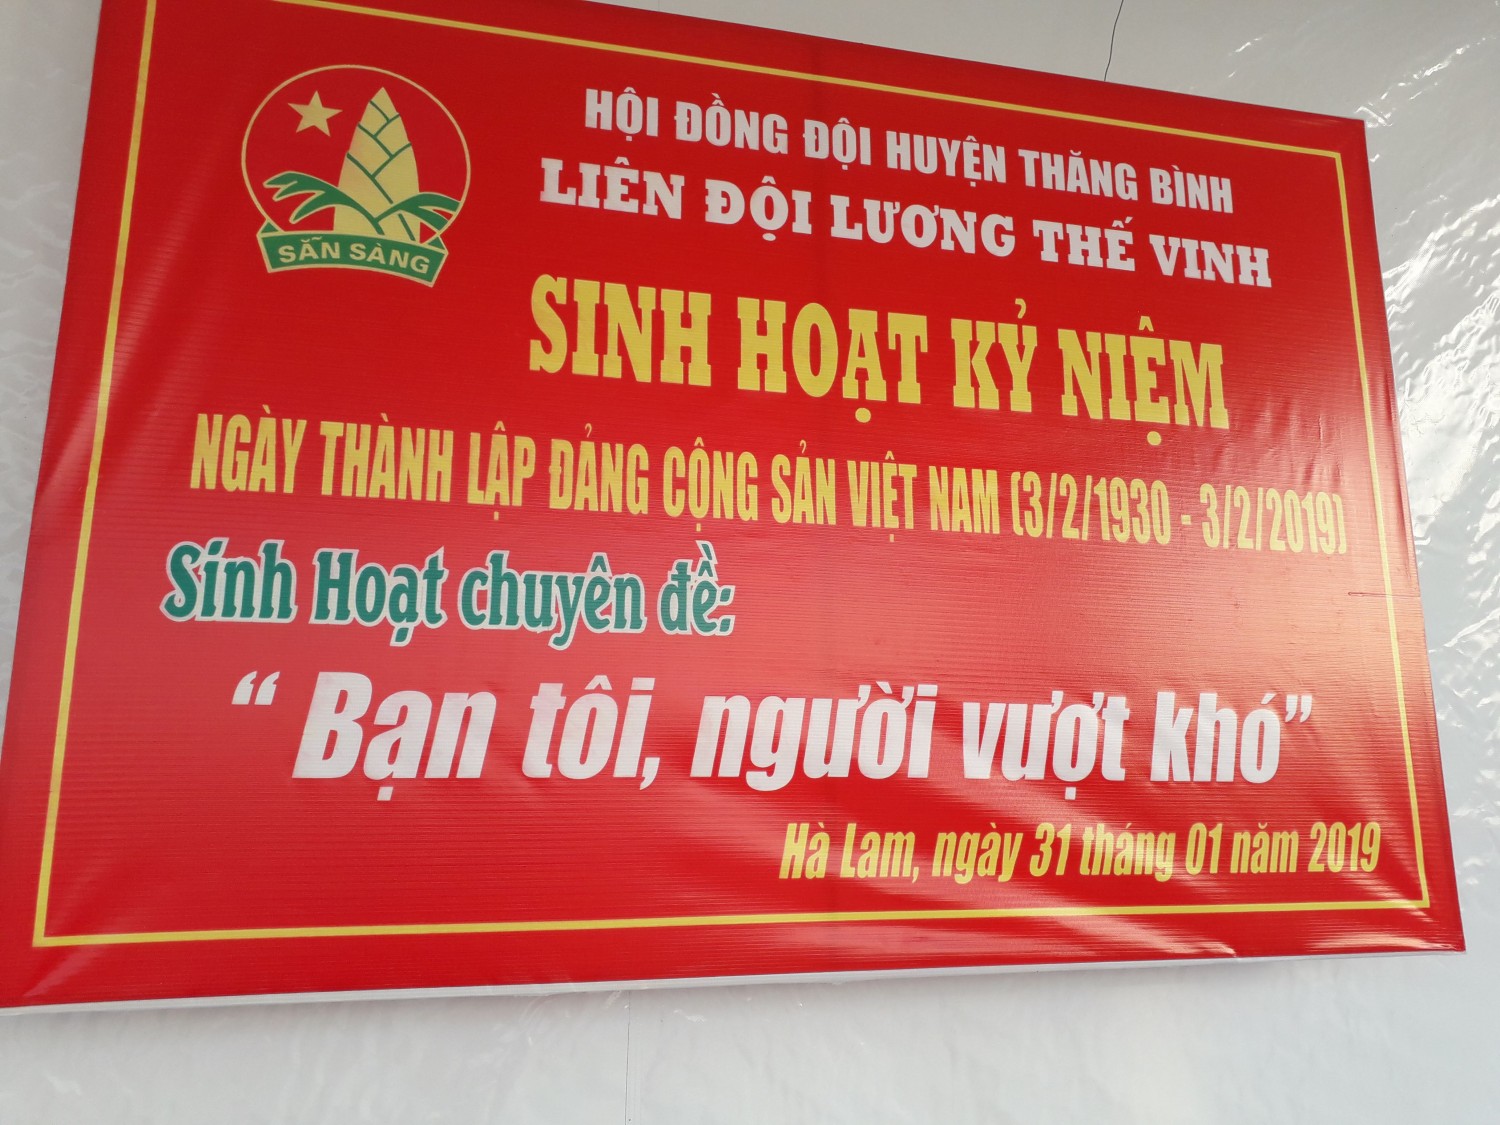 luong the vinh 3